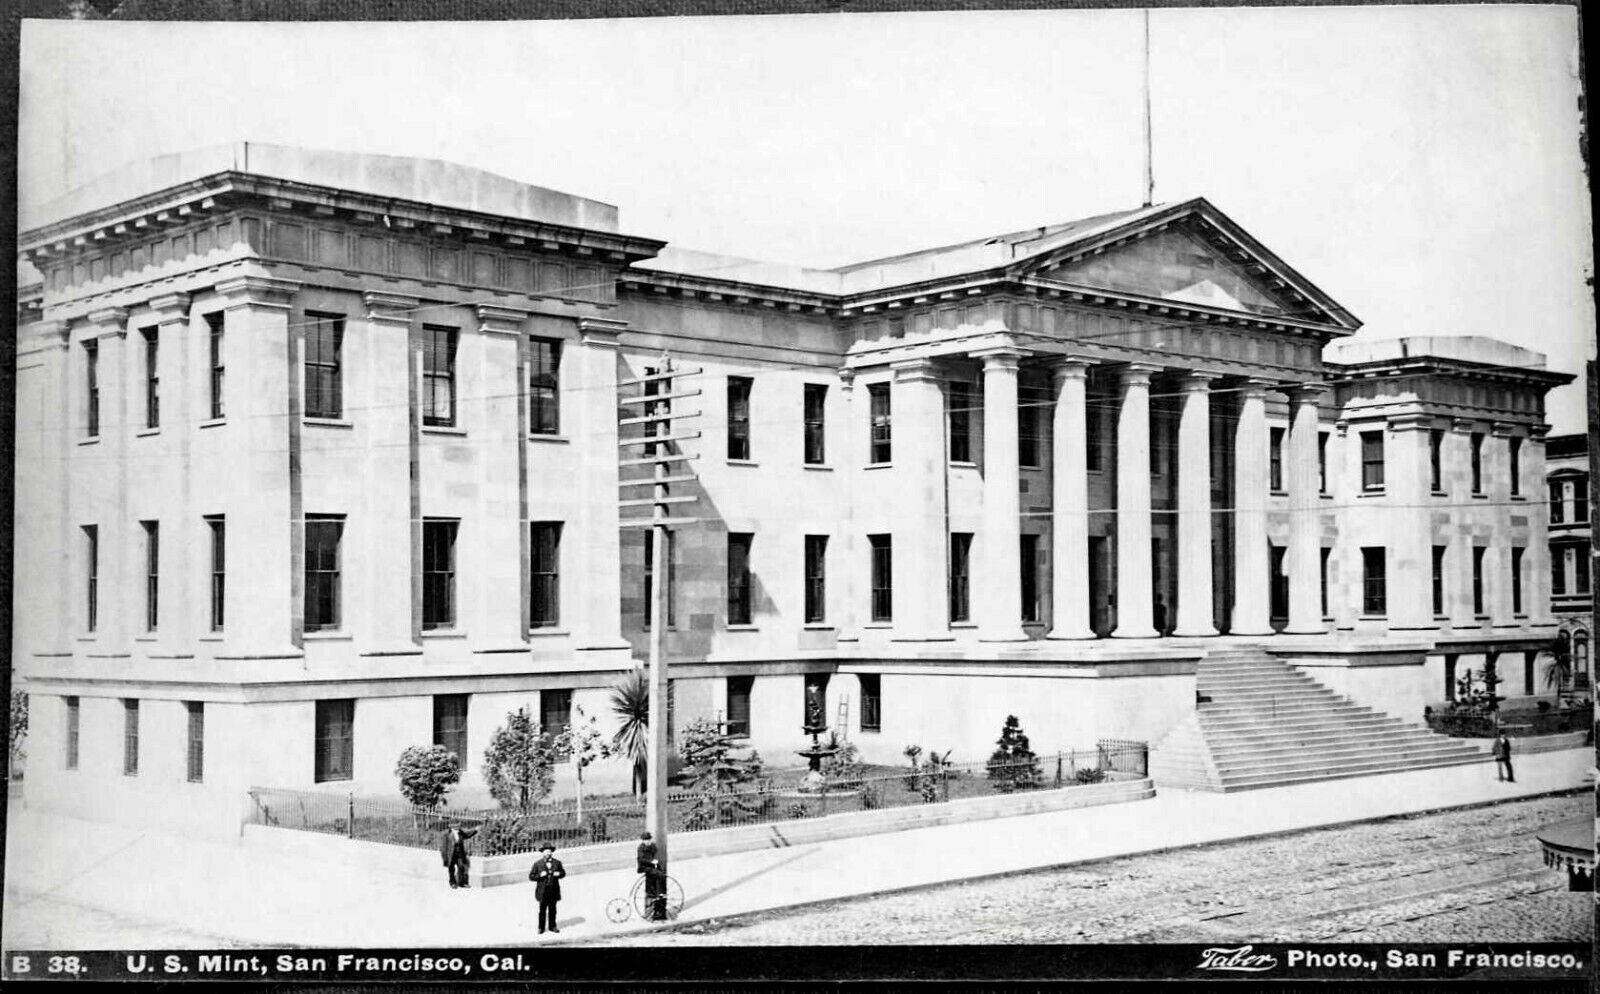 c.1880s SAN FRANCISCO CA I.W. TABER NEGATIVE~THE OLD UNITED STATES MINT BUILDING